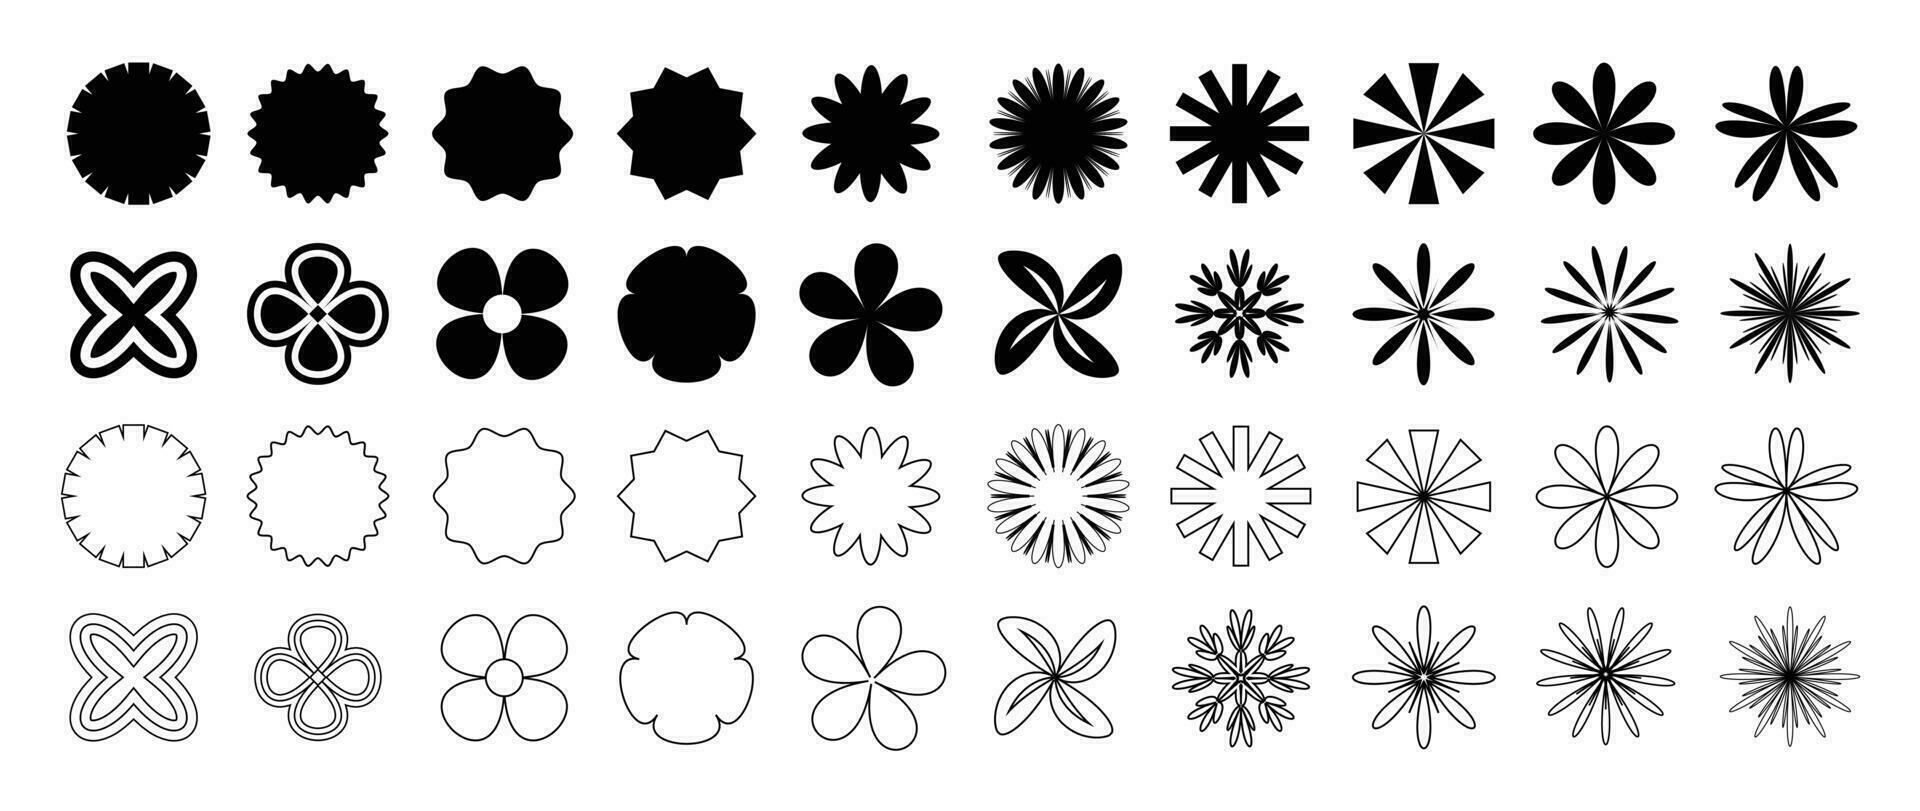 Collection of geometric shapes on white background. Abstract black color icon element of flower, sparkle, snowflake different shapes. Icon graphic design for decoration, logo, business, ads. vector